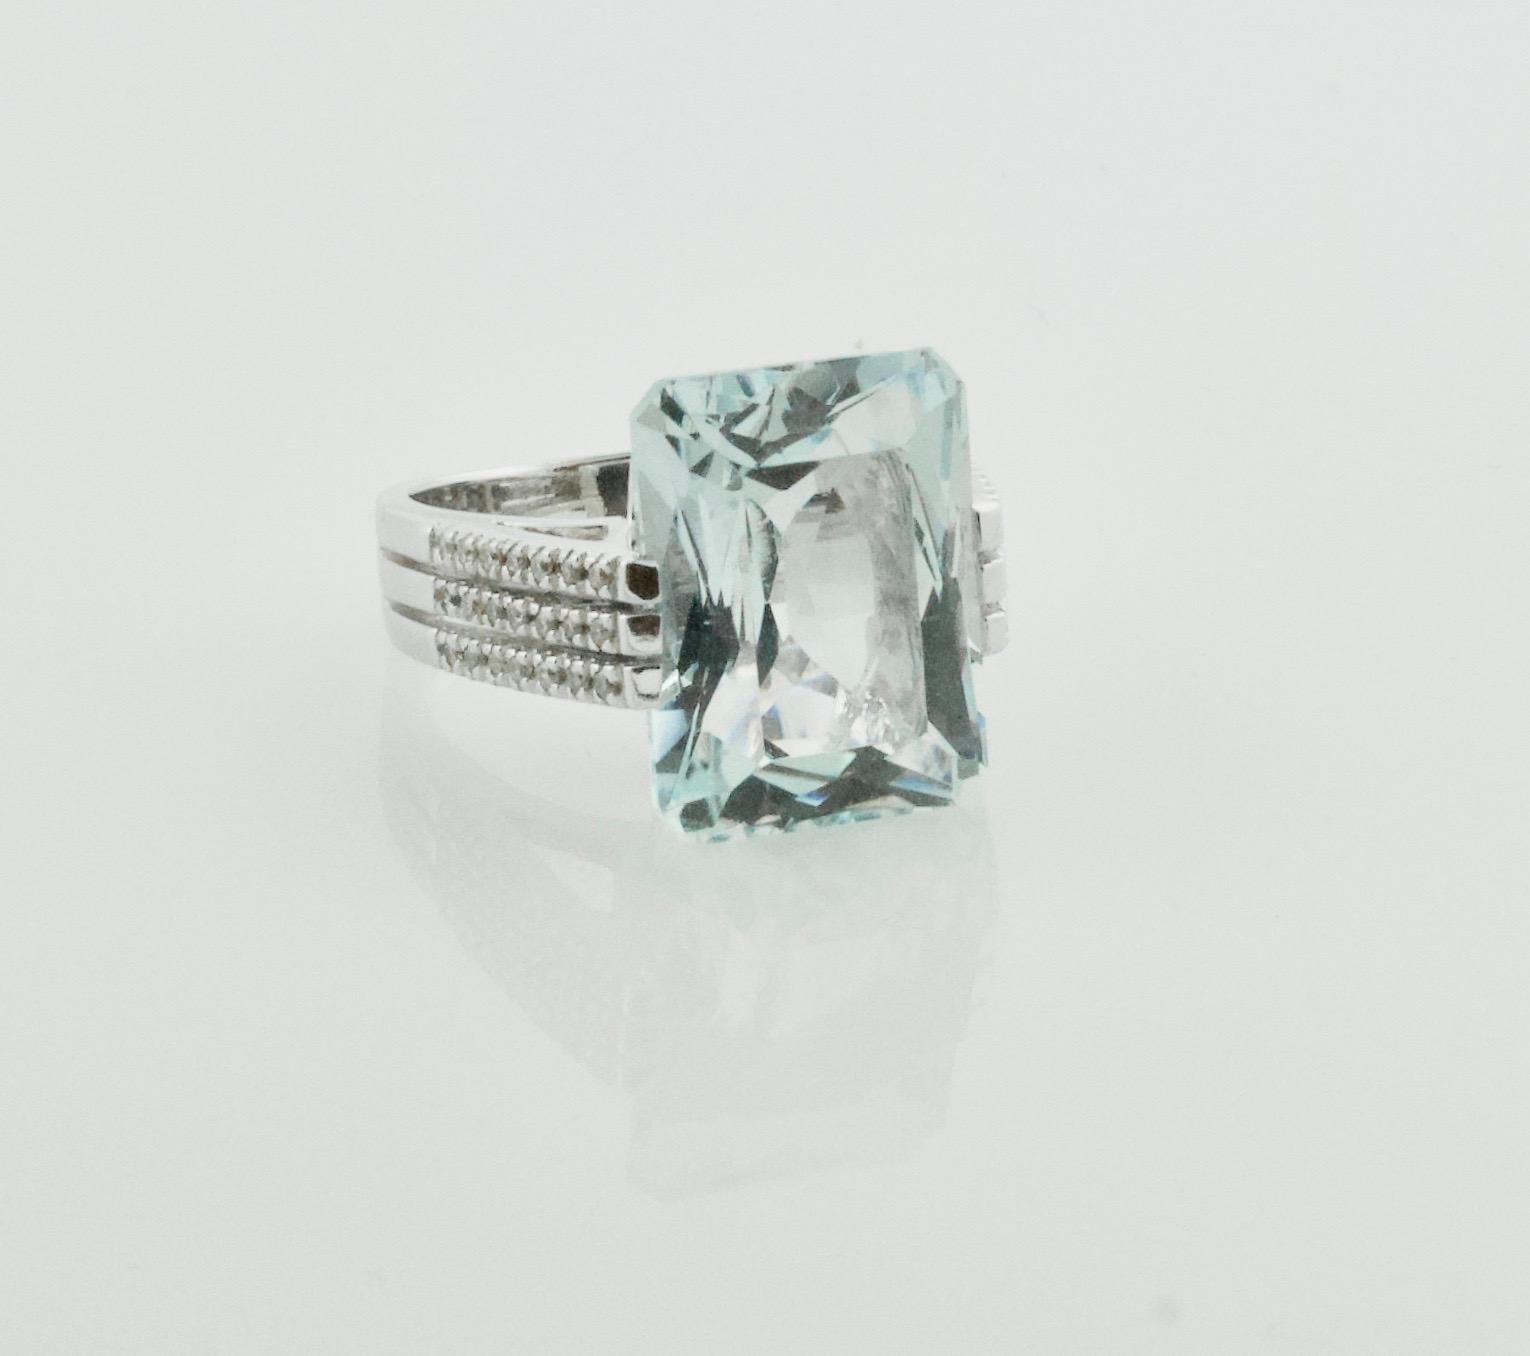 Introducing the Estate Modernistic Aquamarine and Diamond Ring in White Gold, a true work of art that will take your breath away. This stunning ring features a large emerald-cut aquamarine gemstone weighing approximately 12.00 carats, perfectly set